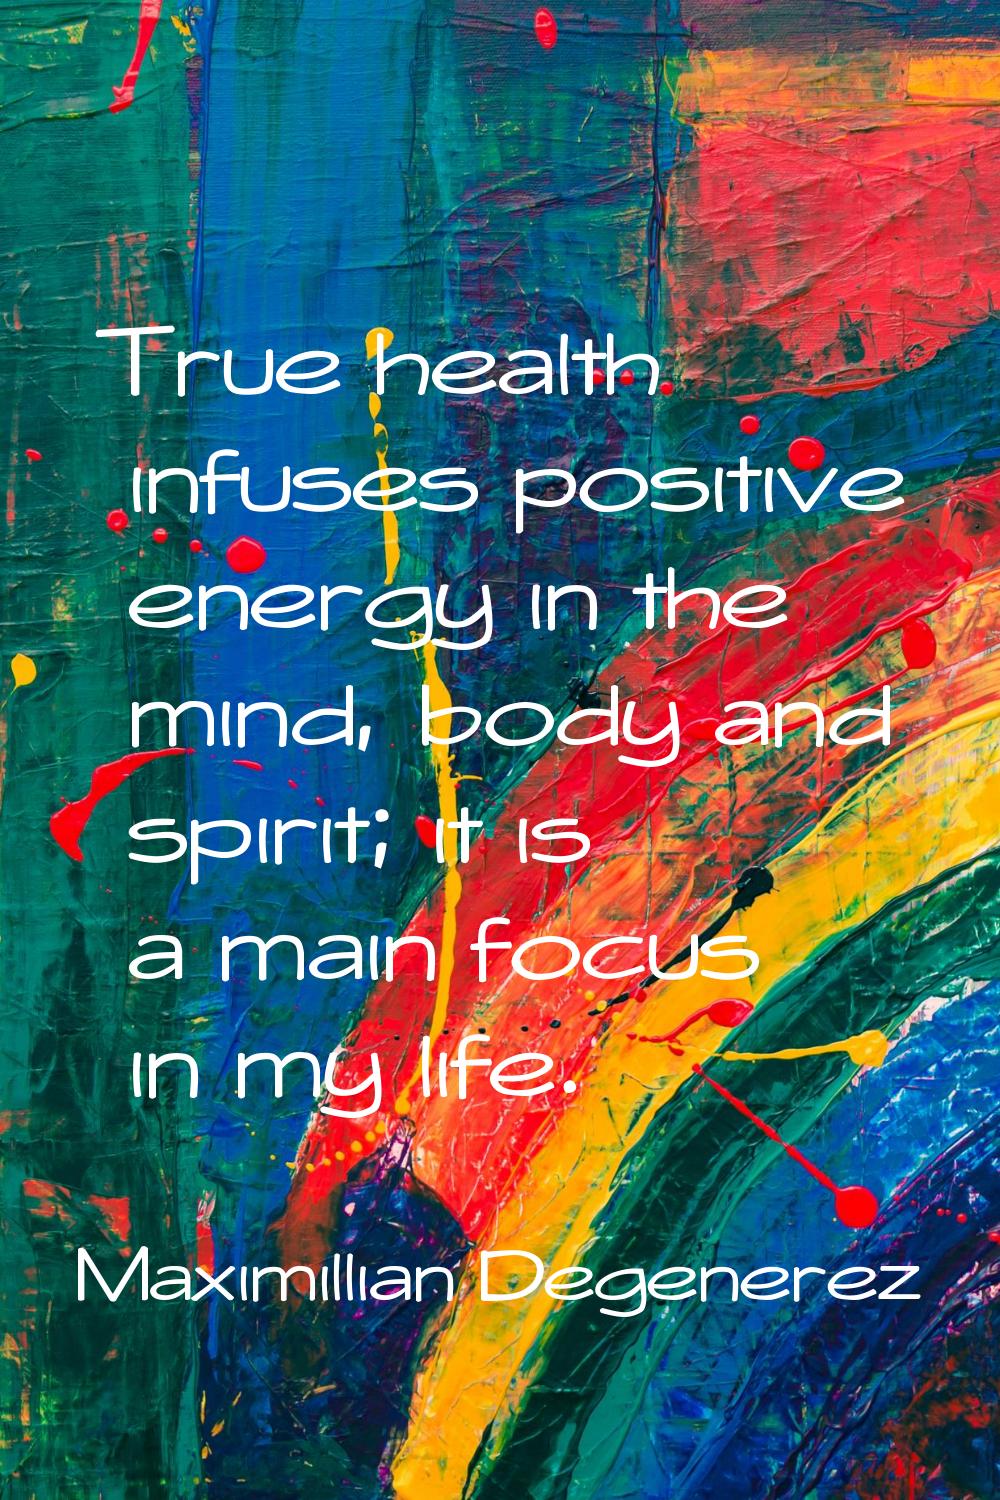 True health infuses positive energy in the mind, body and spirit; it is a main focus in my life.